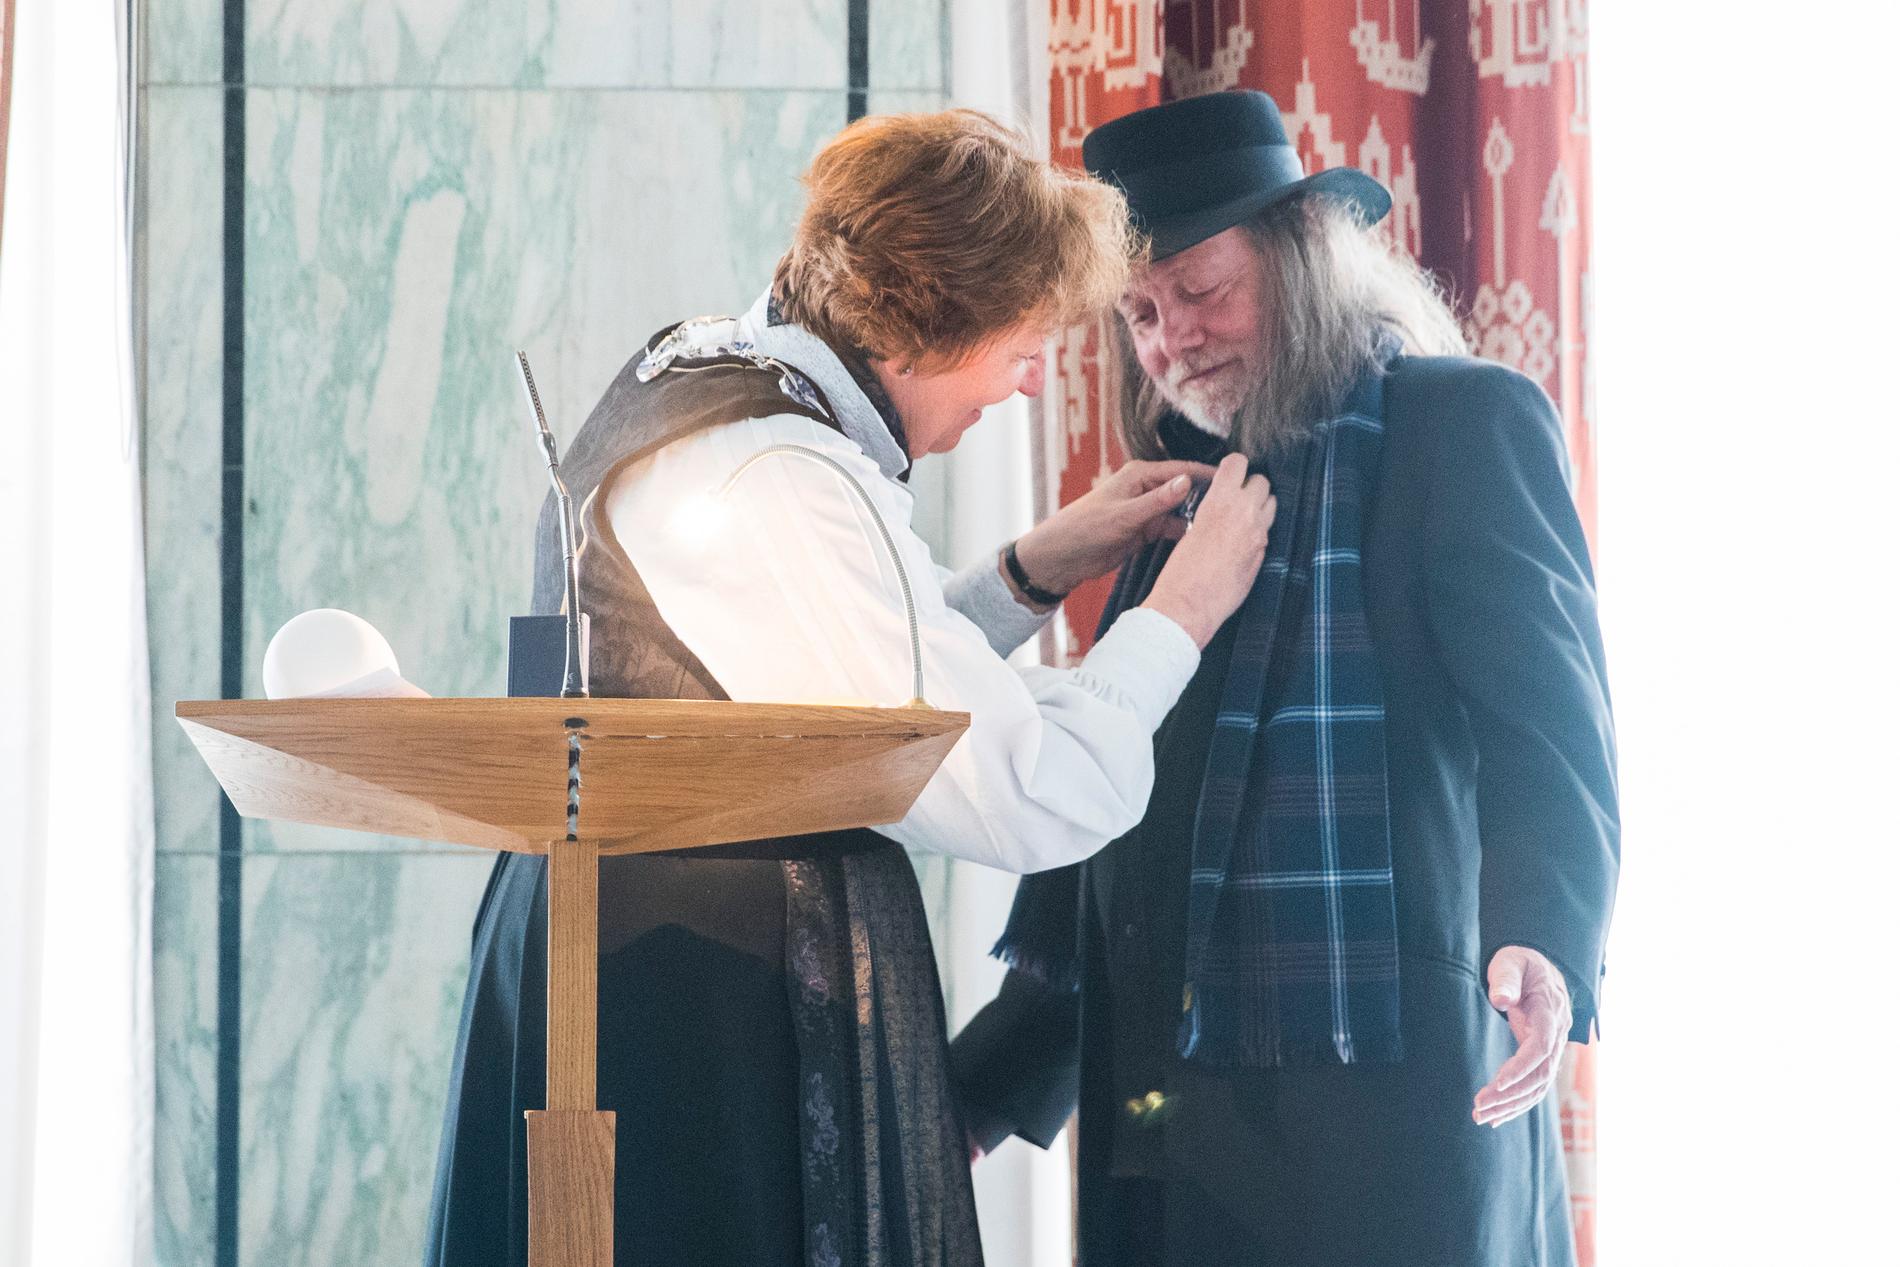 2017: Lilbjörn Nielsen received the St. Hallvard Medal, the highest award in the city of Oslo.